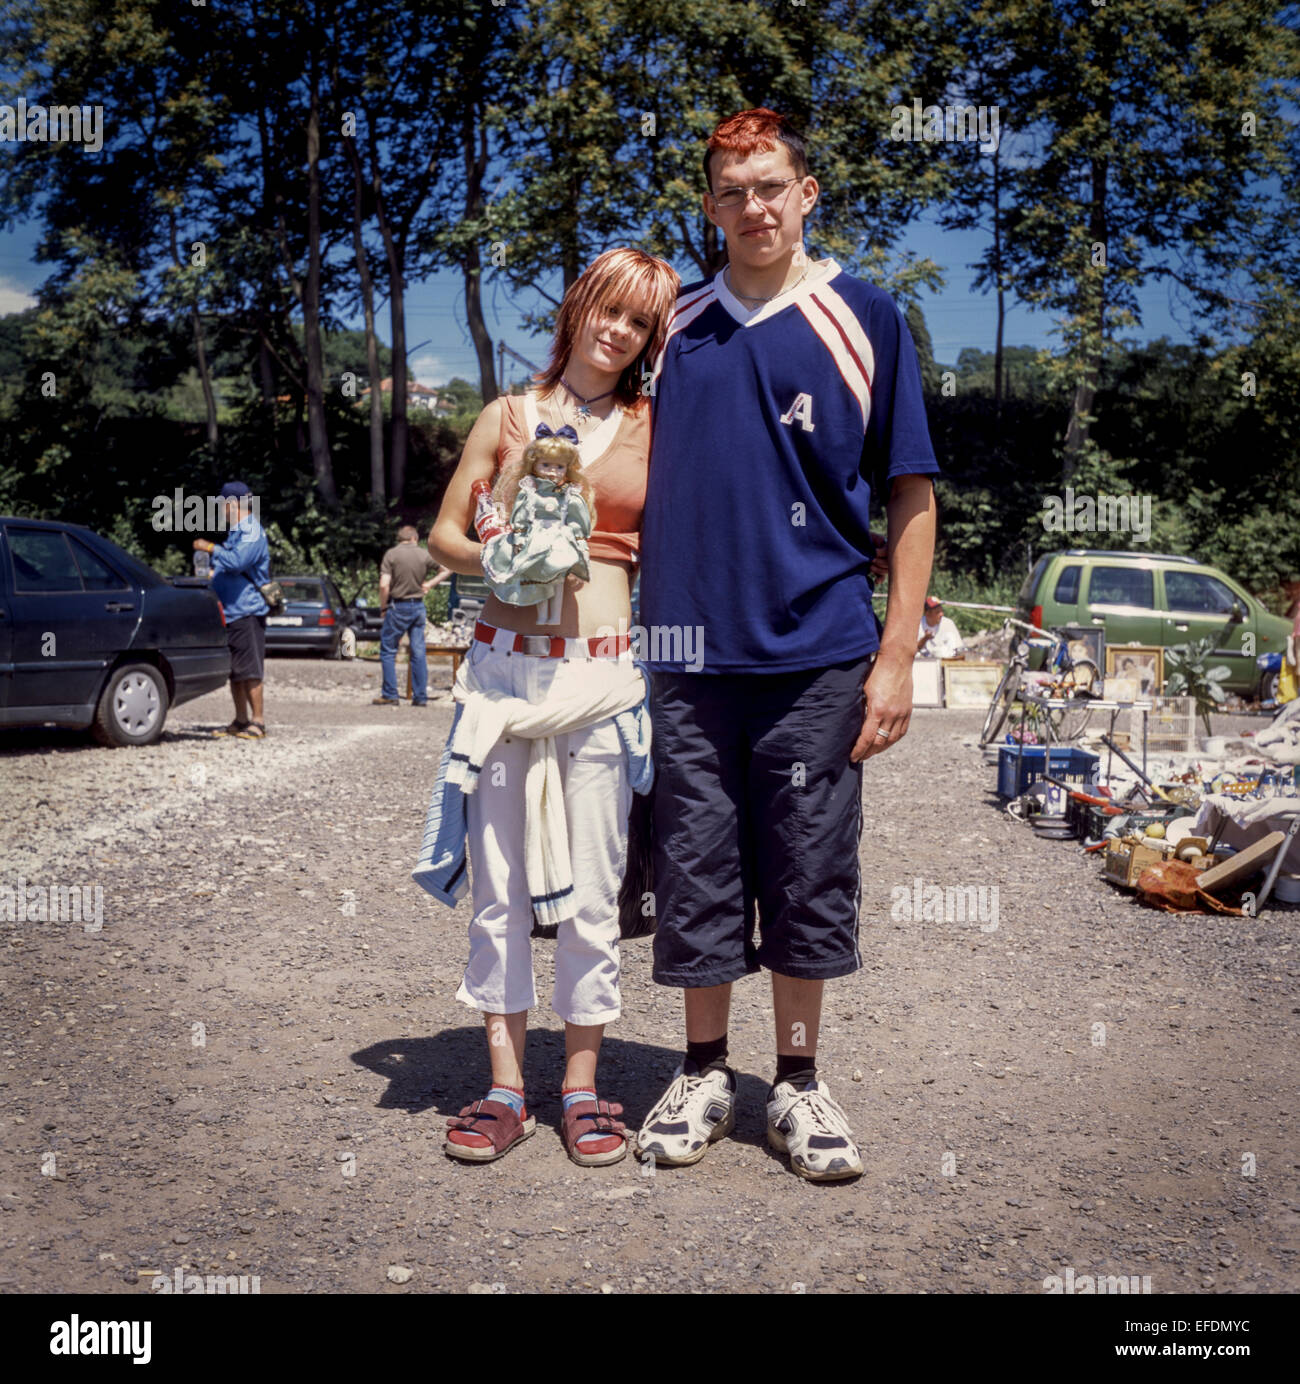 A young couple, pair, shopping at a flea market, Czech Republic, lifestyle people Stock Photo